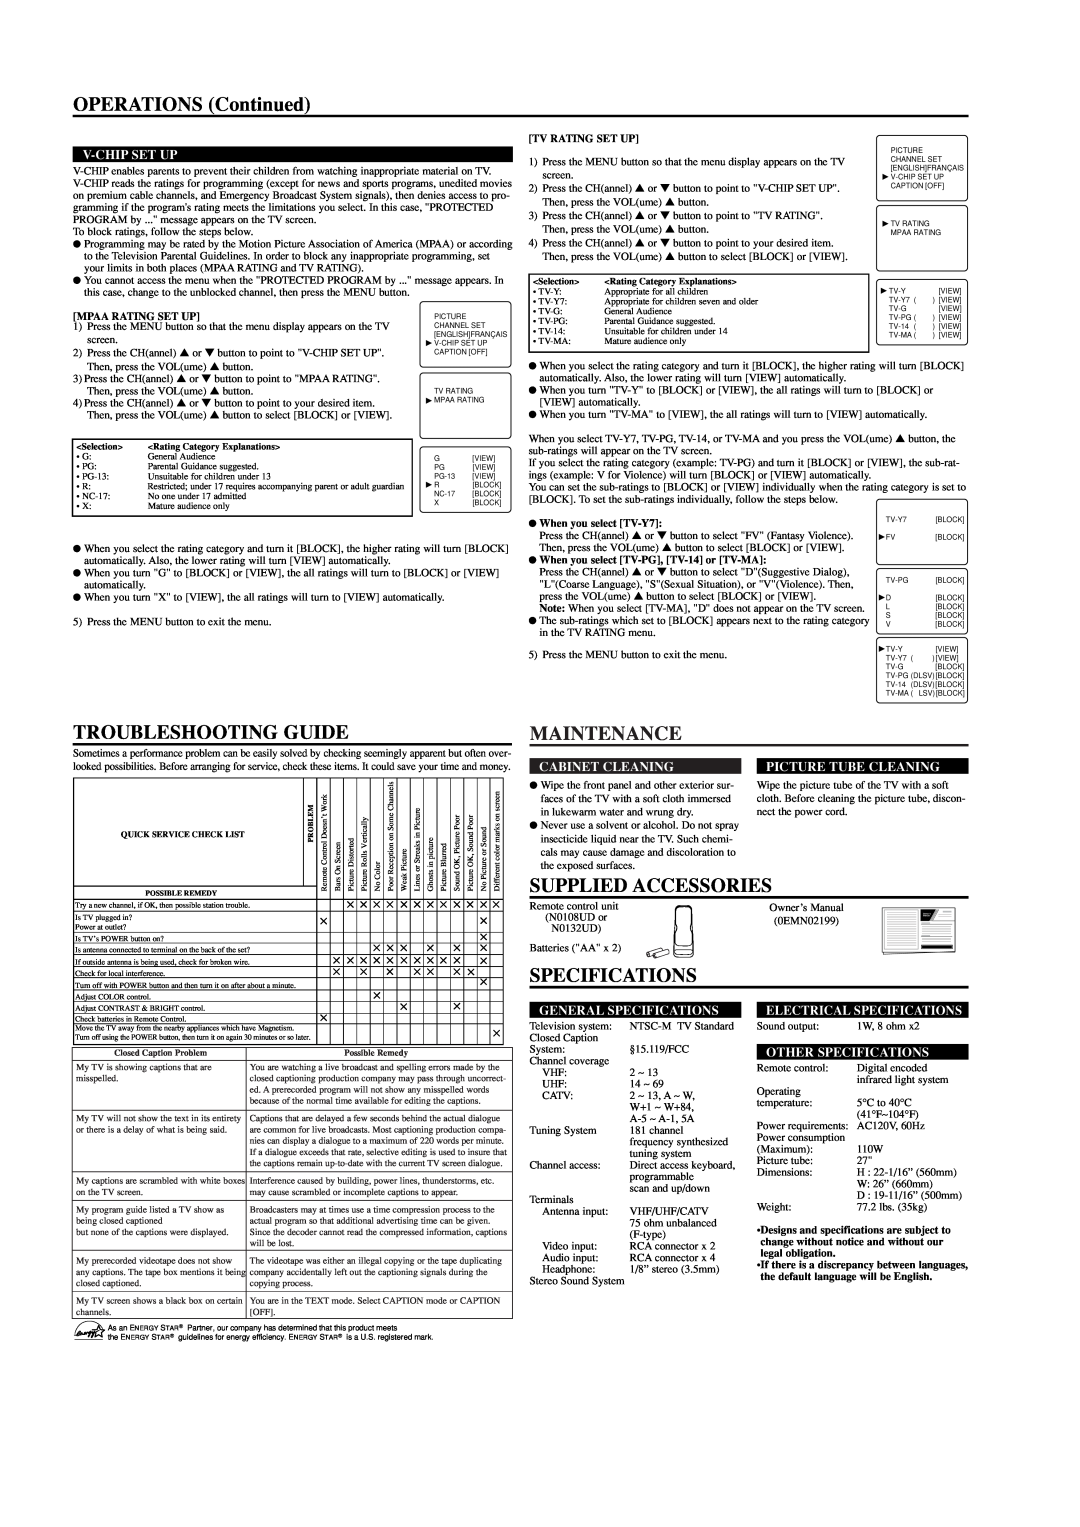 Sylvania RSDCT2703R OPERATIONS Continued, Troubleshooting Guide, Maintenance, Supplied Accessories, Specifications 